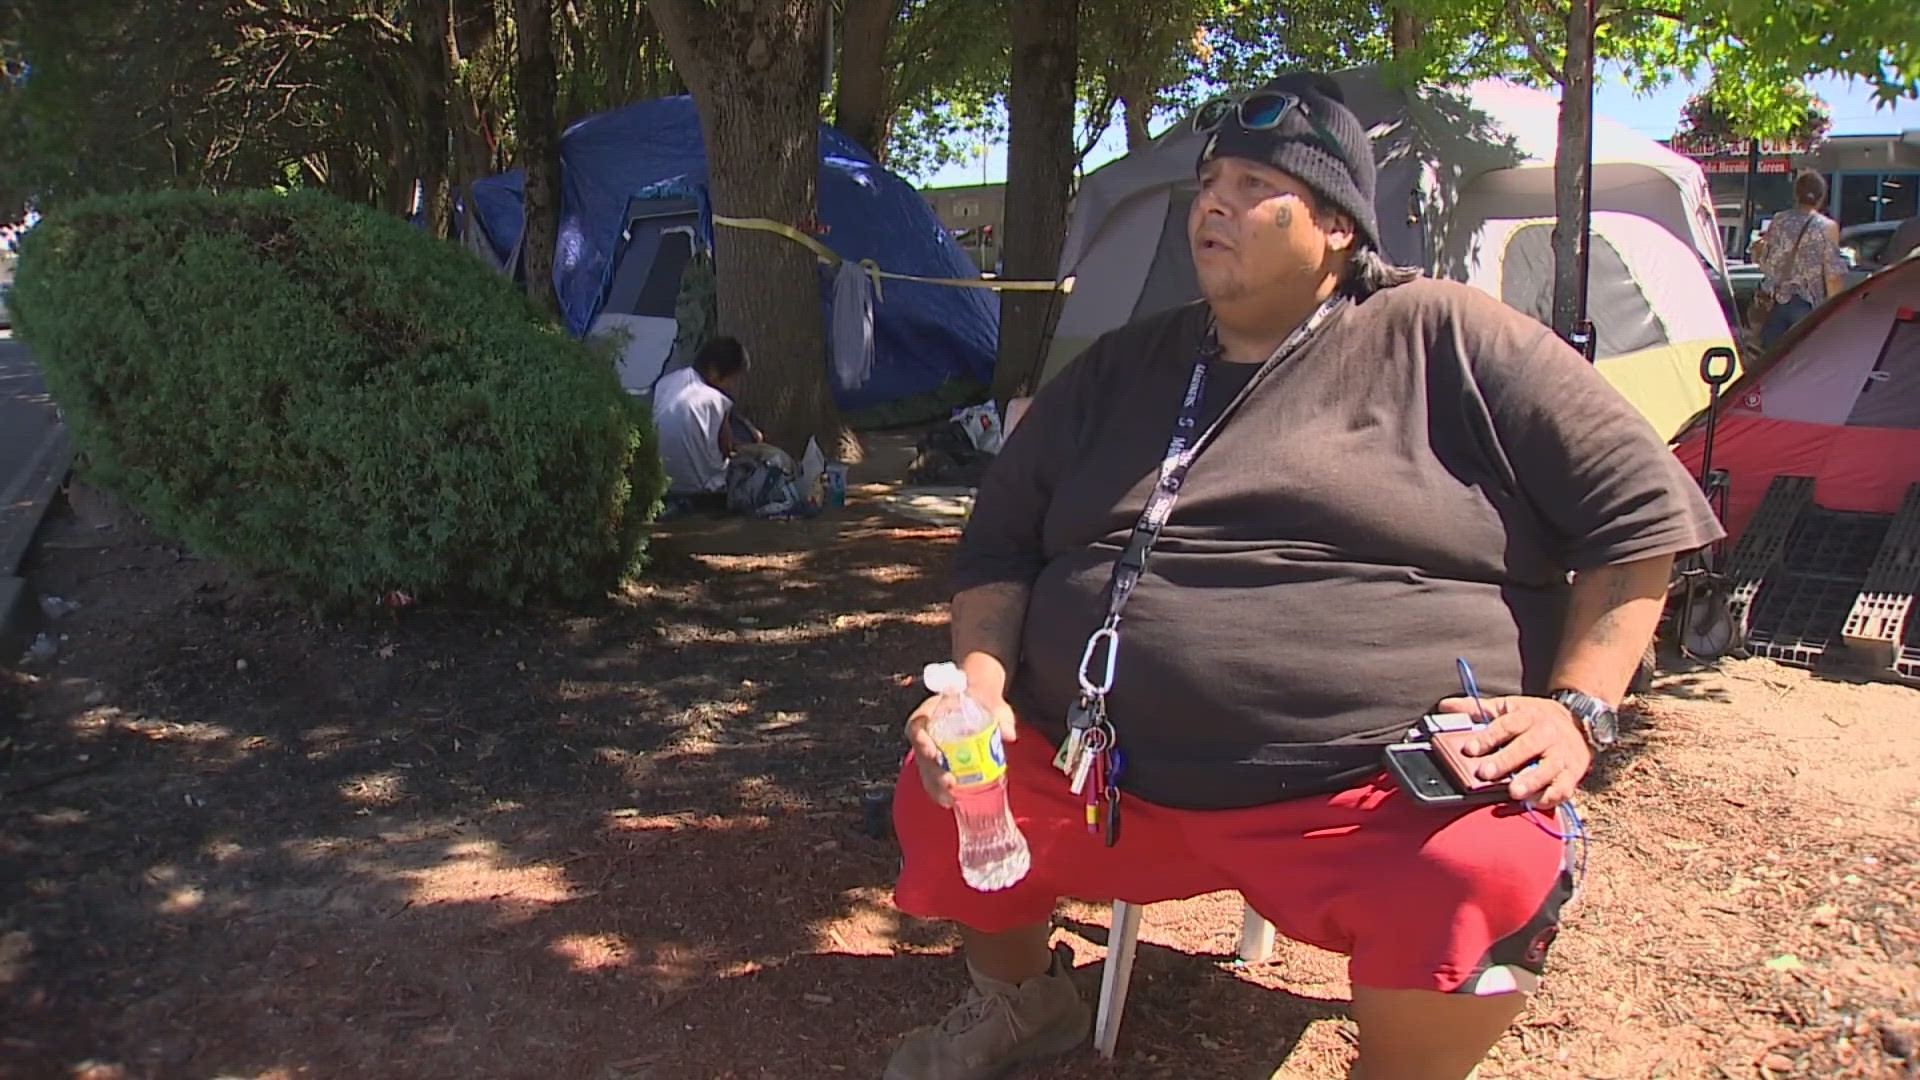 City leaders are attempting to balance mitigating public camping with giving people who need it places to rest when they have nowhere else to go.